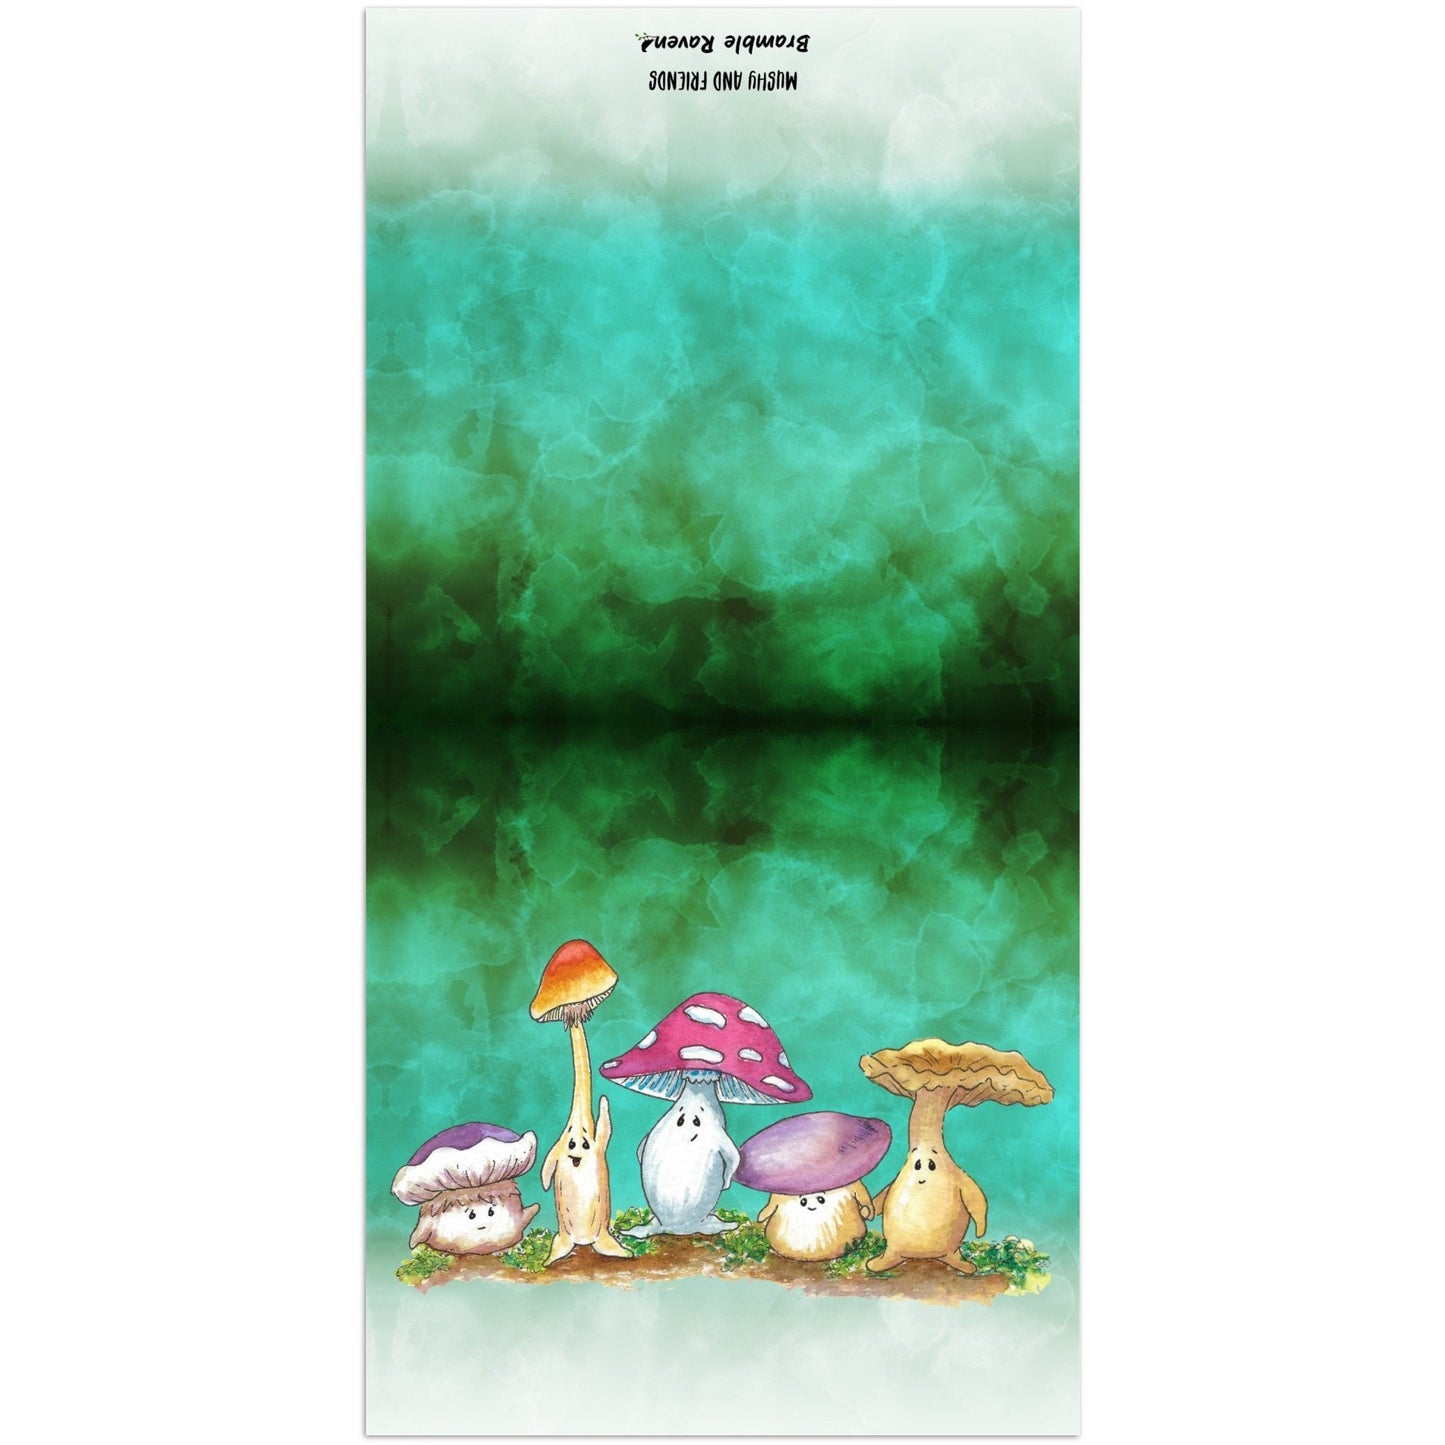 A pack of ten greeting cards and envelopes.  Each card is 5.5  by 5.5 inches. The front features Mushy and his whimsical mushroom friends on a green gradient background. The inside has a slim green border and plenty of room for your message.